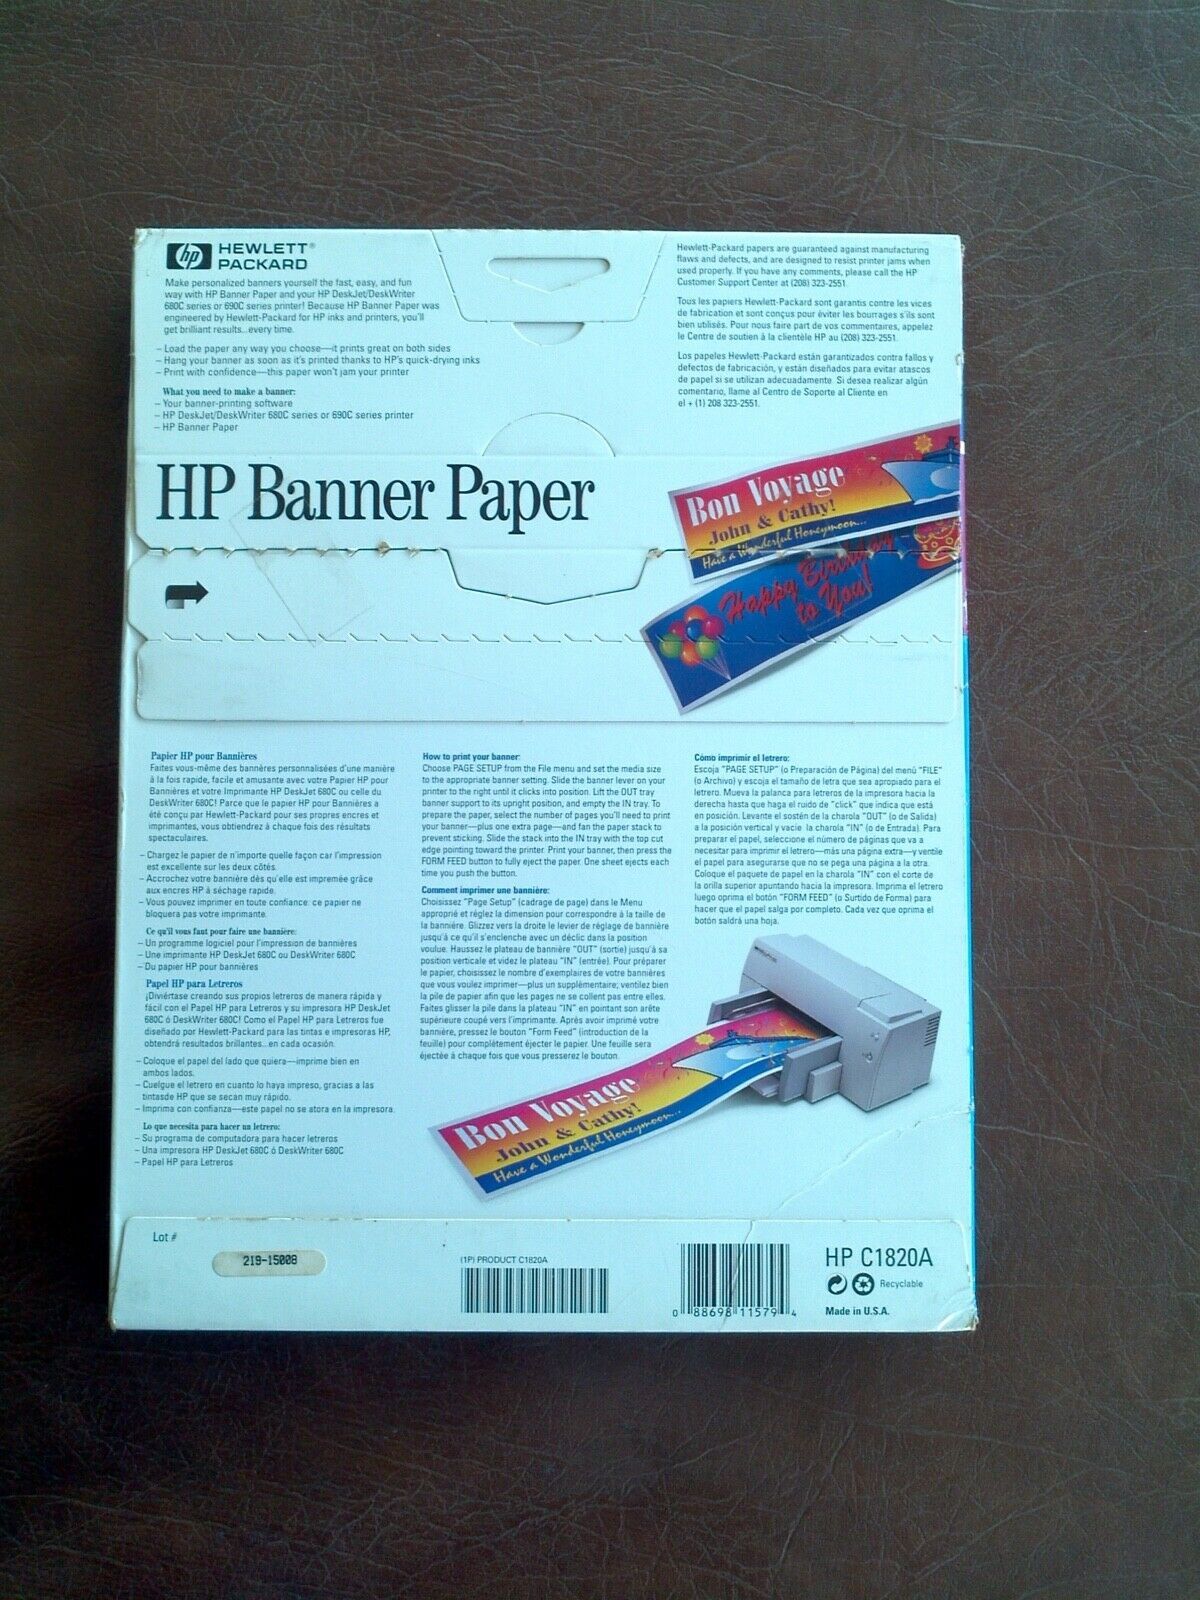 HP Banner Paper for Inkjet Printers - 15 5' banners - 24 lb HP C1820A NEW